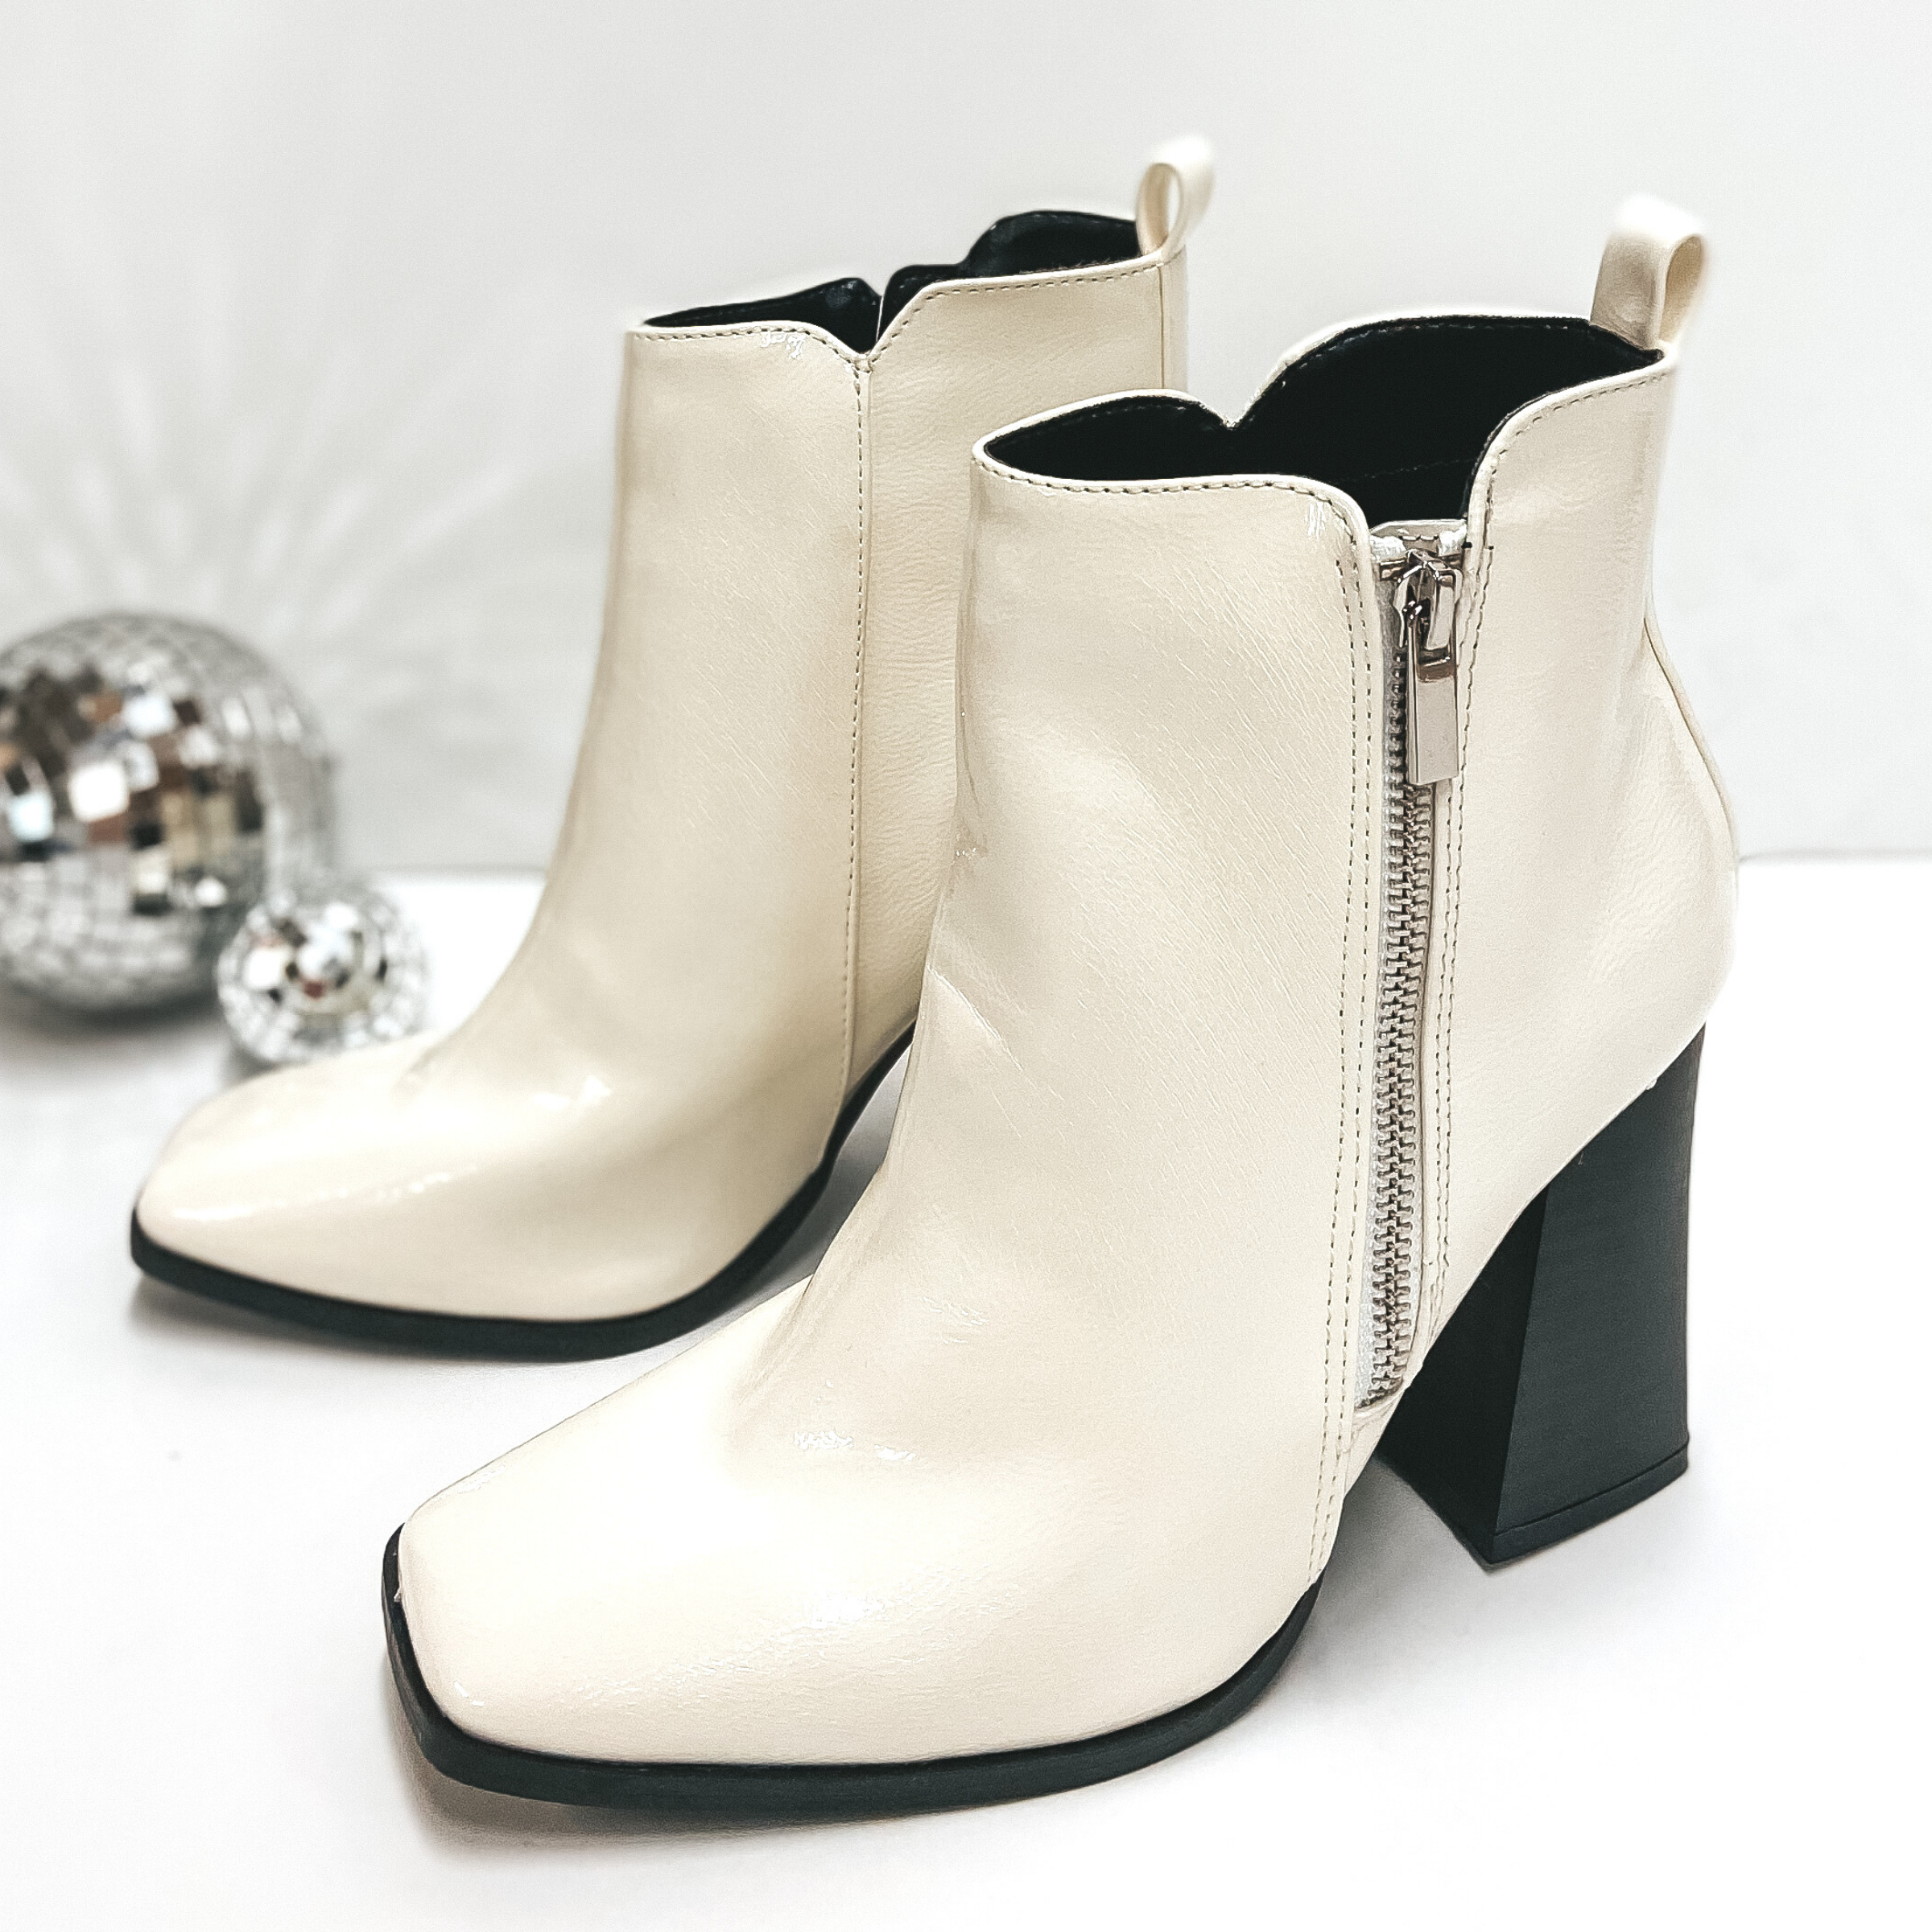 A pair of ivory booties with a square toe and a black high heel. Pictured on white background with disco balls.